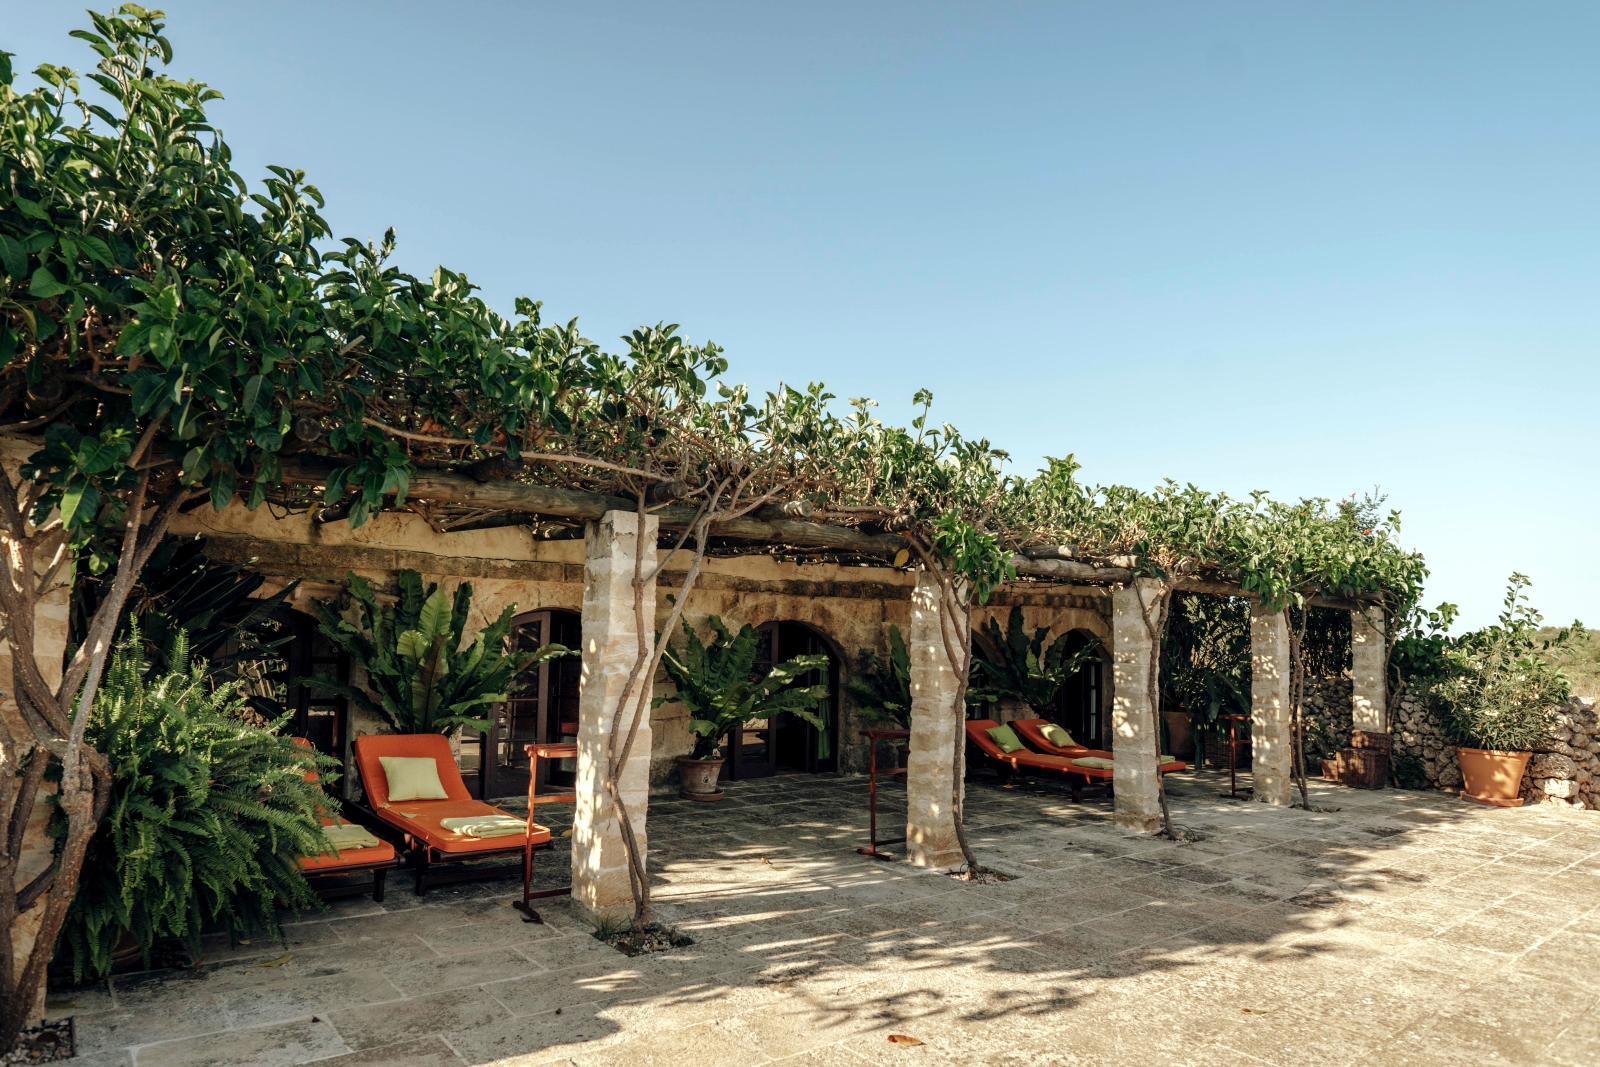 Shaded loungers along the main building of luxury villa binicalaf on Menorca